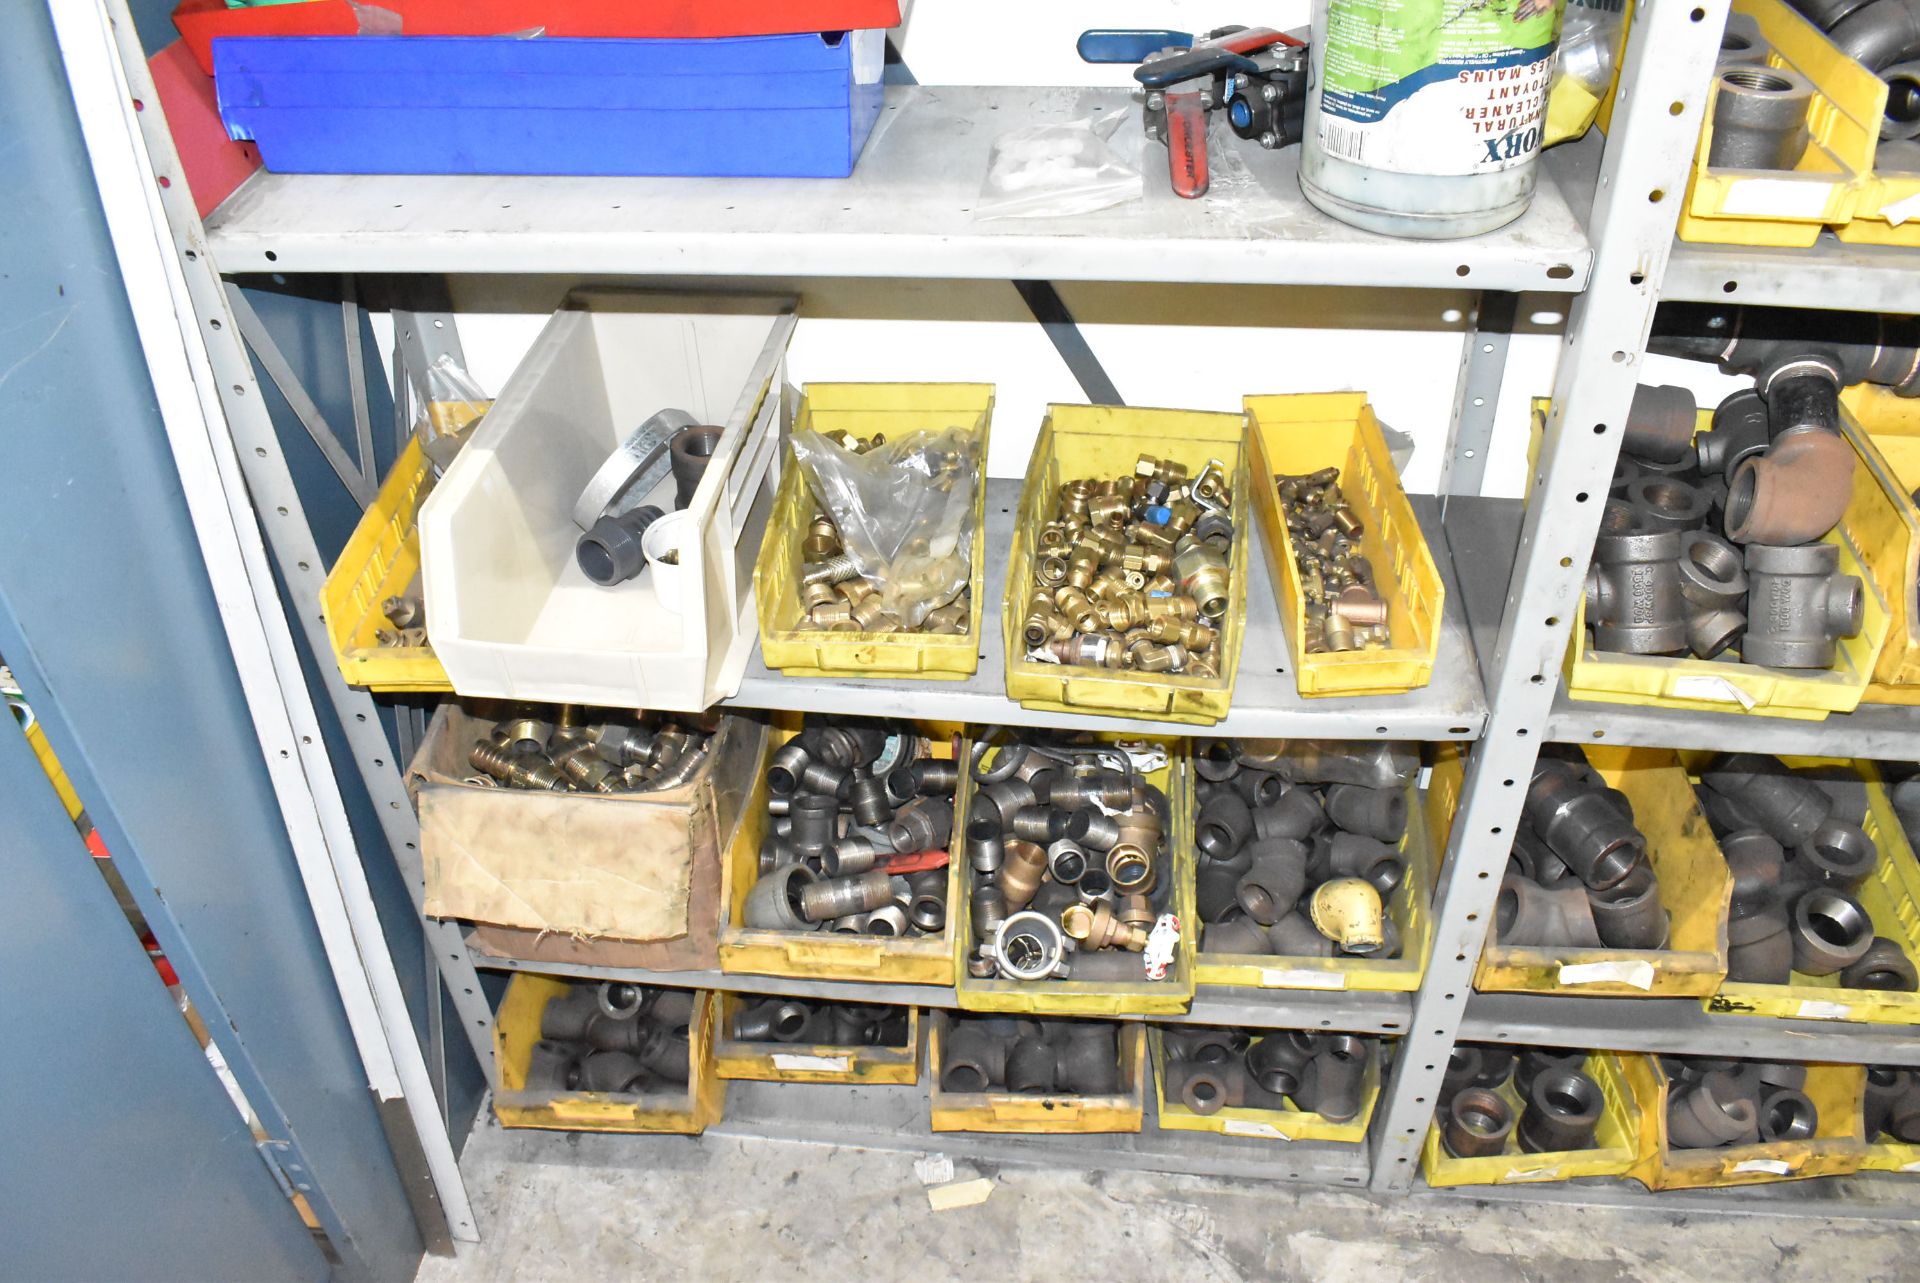 LOT/ (2) SECTIONS OF STEEL SHELVES WITH CONTENTS - INCLUDING PIPE FITTING, ELBOWS, PVC FITTINGS, - Image 5 of 8